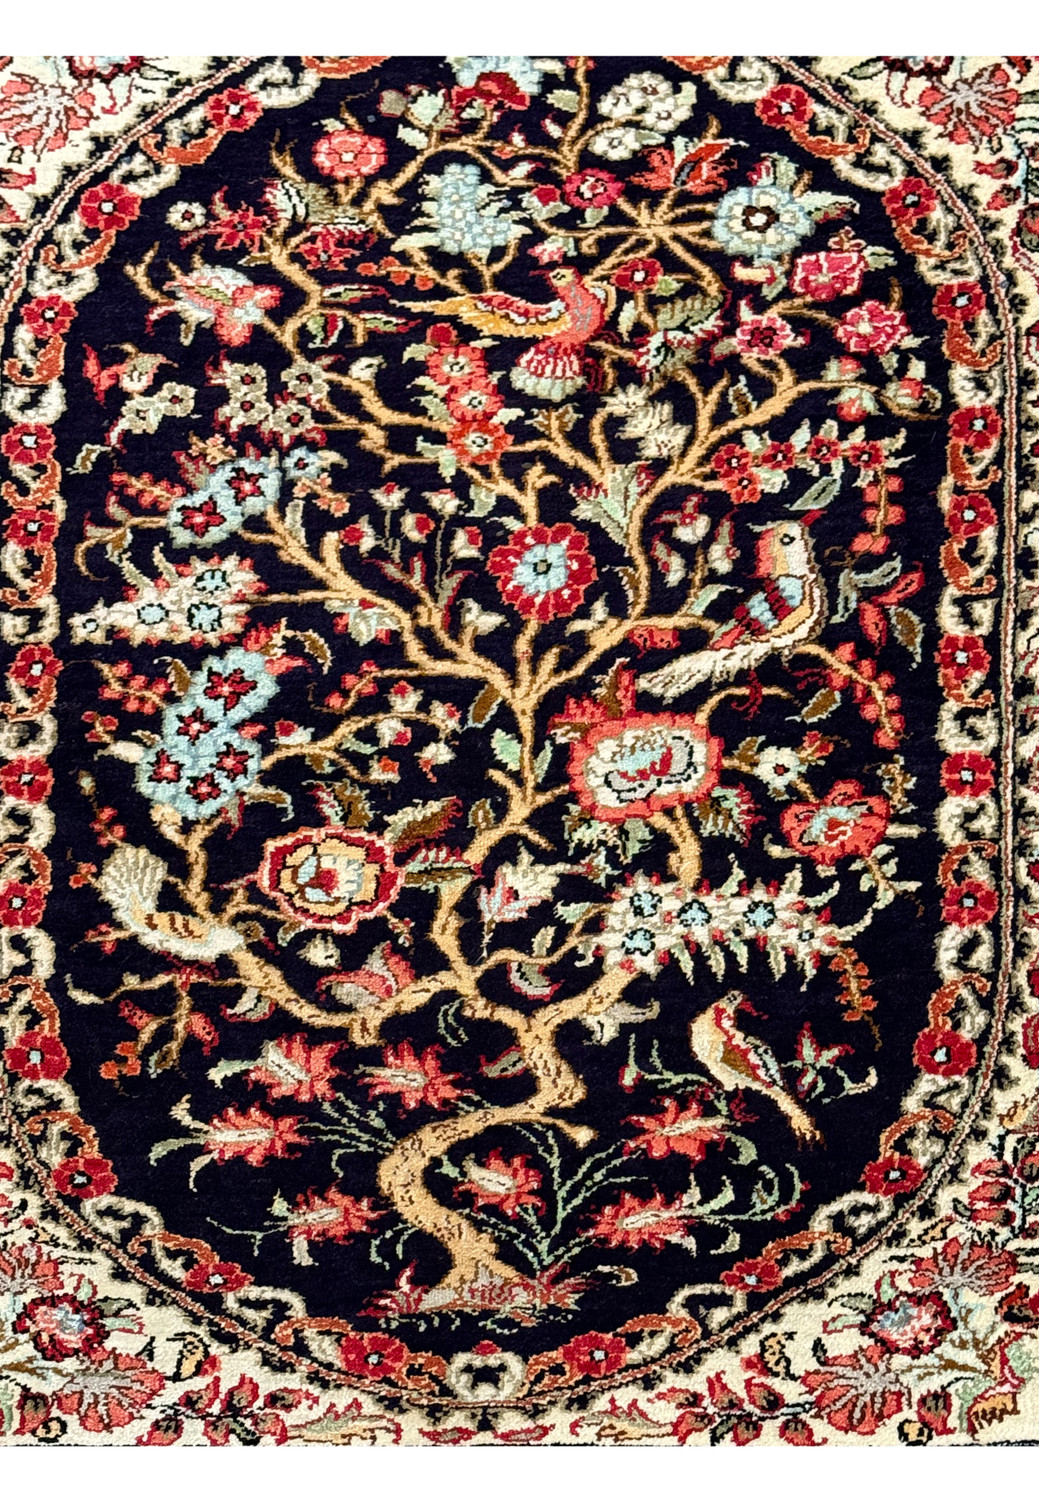 Detailed image focusing on the central tree-of-life motif surrounded by floral accents on a Persian Qum silk rug